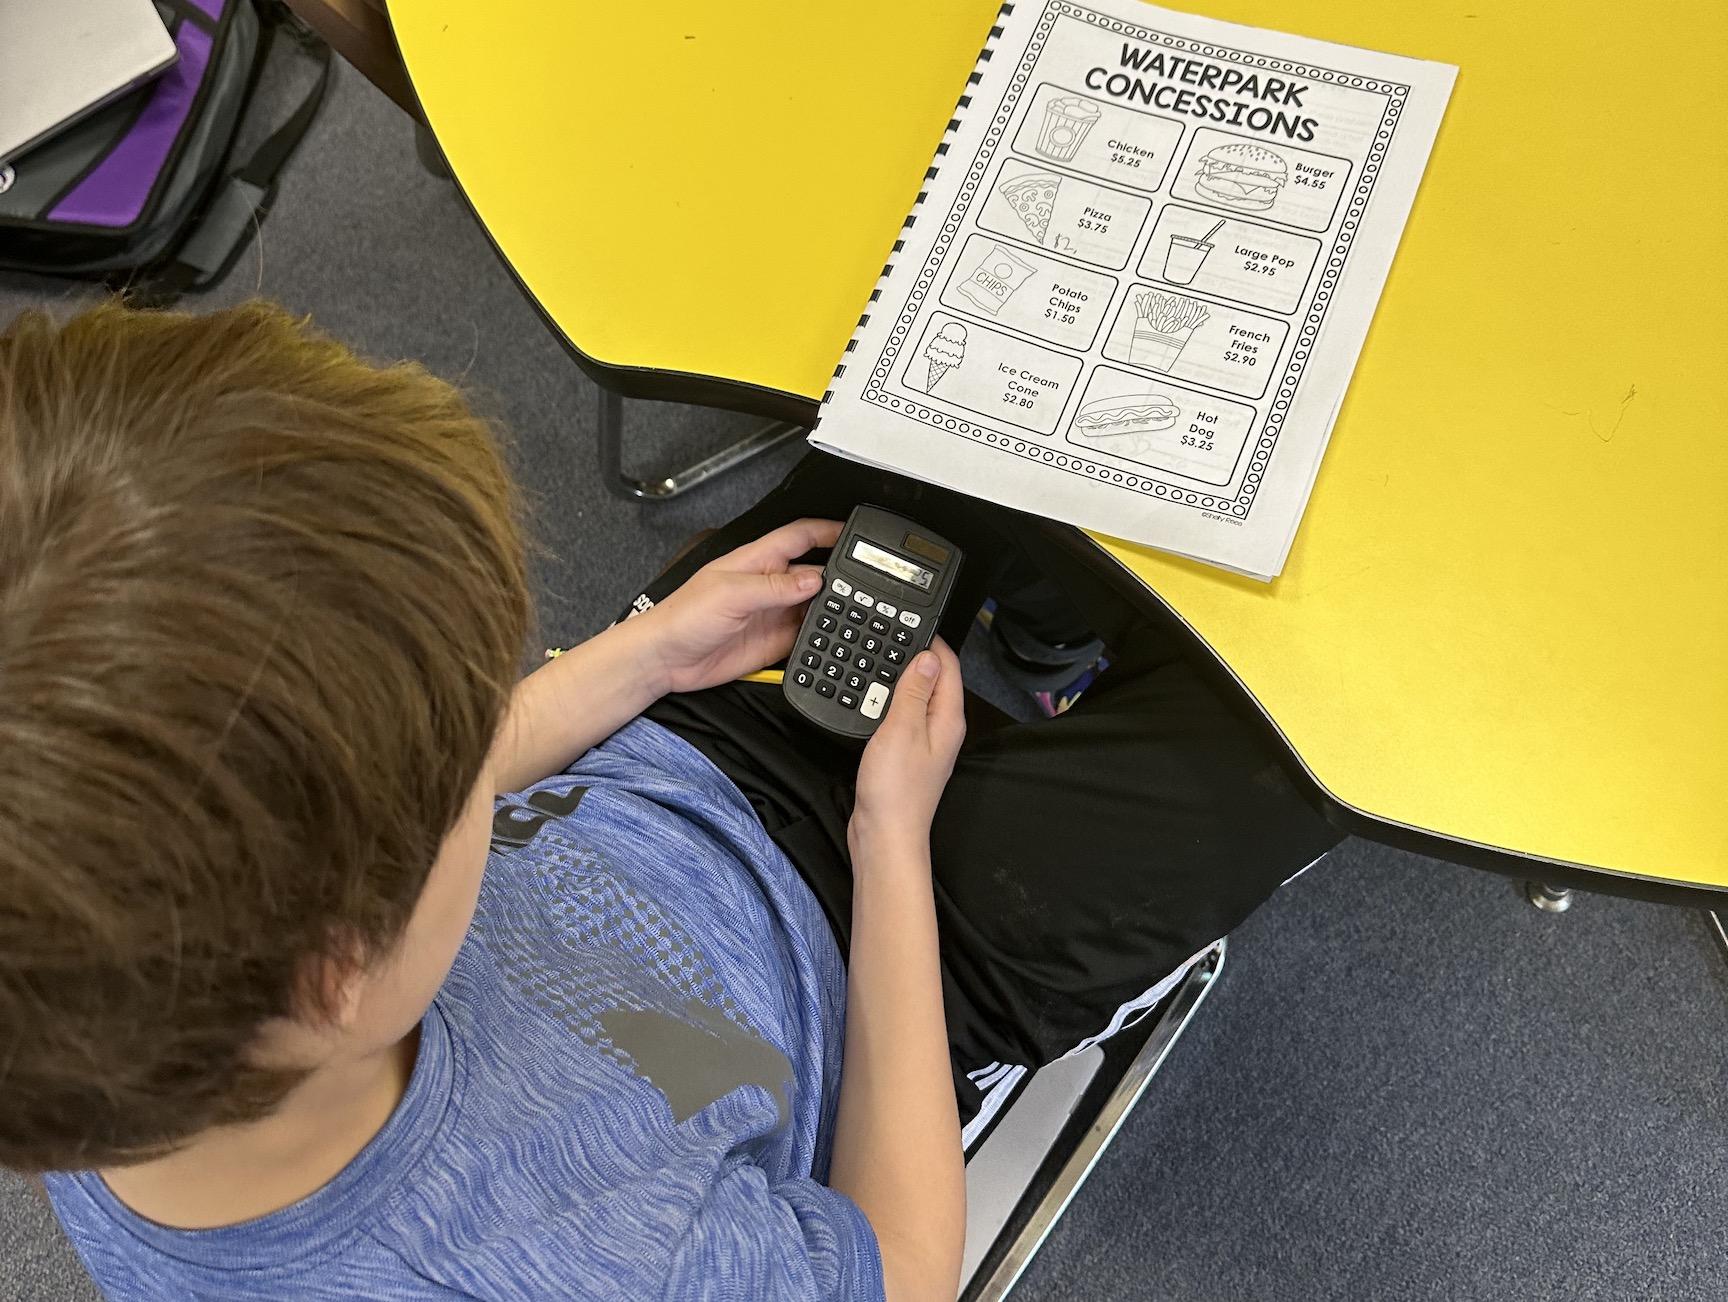 Gavin Kerstetter uses his calculator to complete math word problems